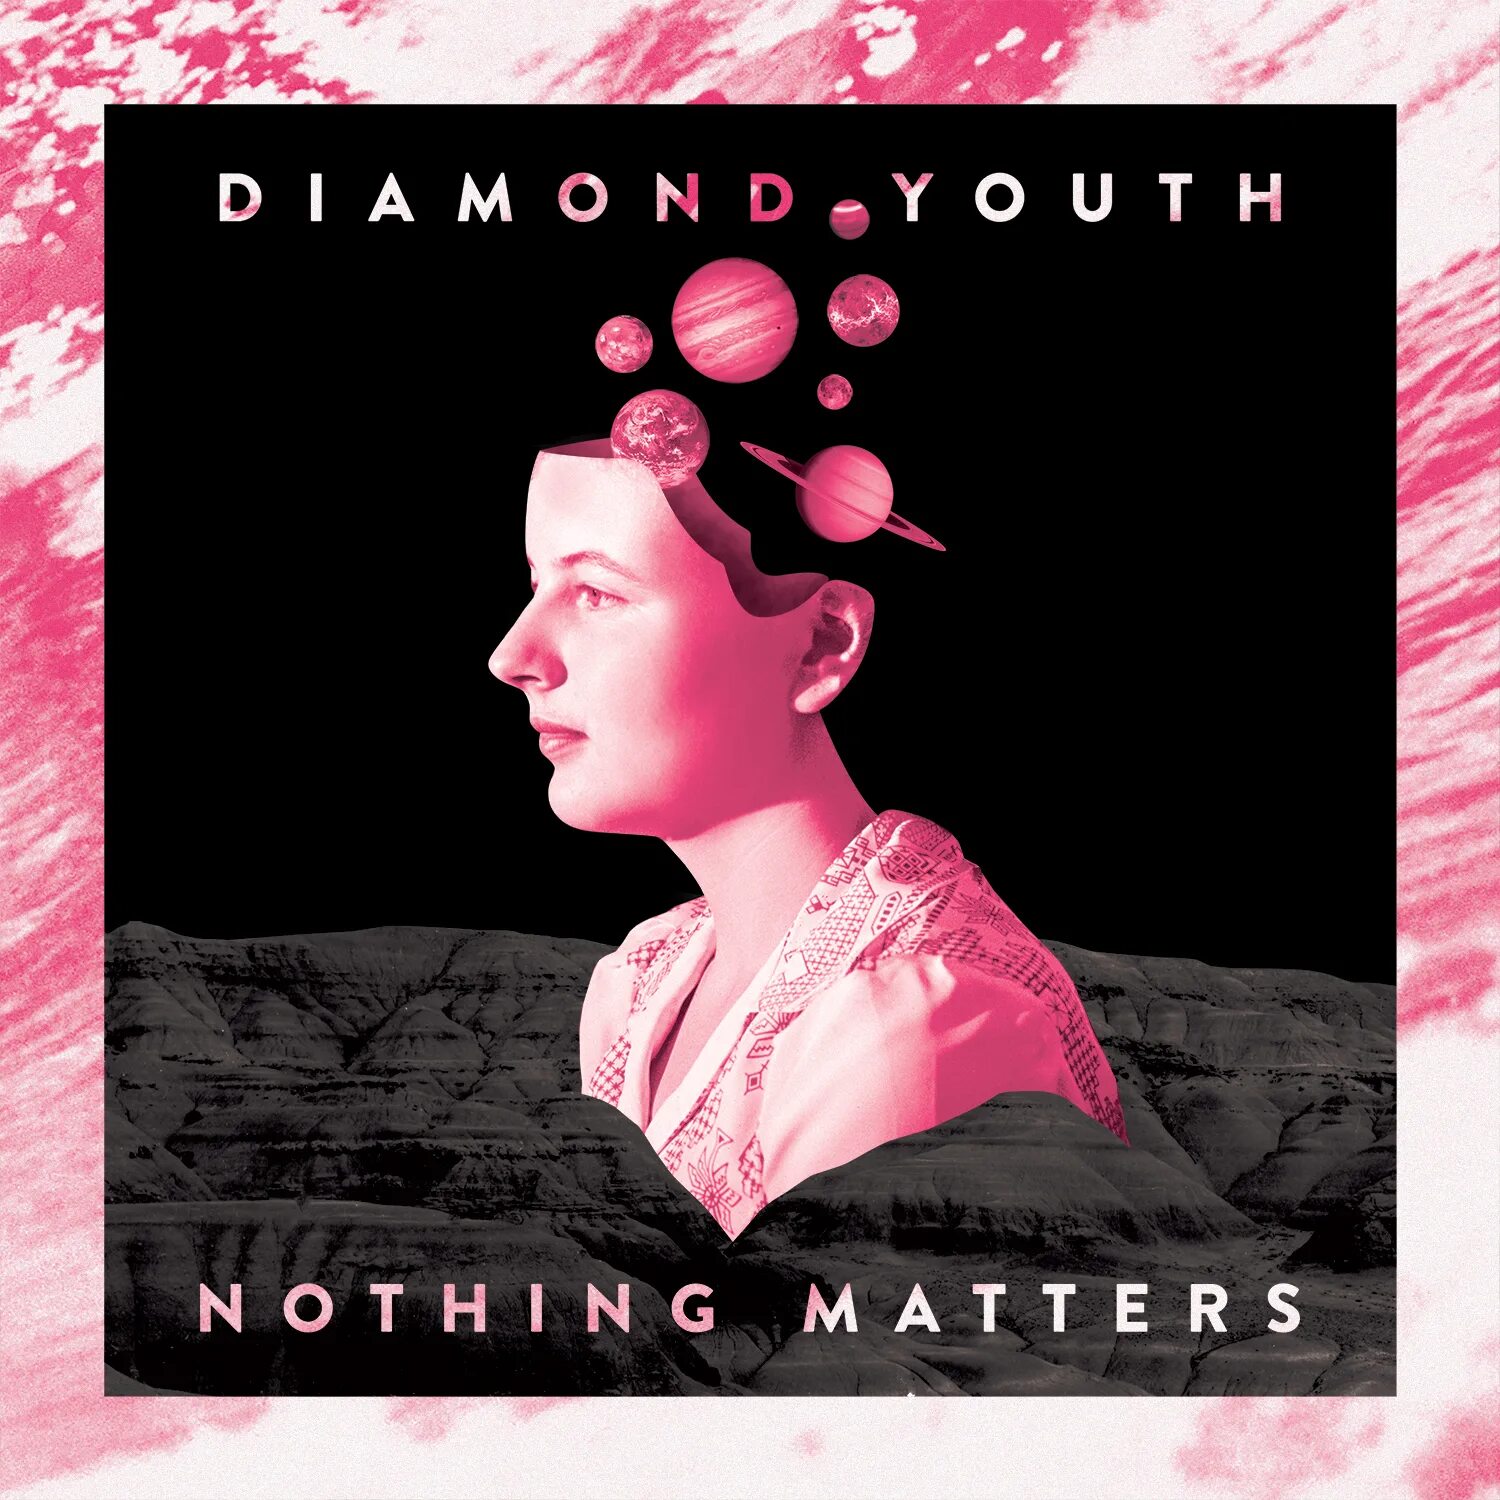 Nothing matters the last. Nothing matters. Diamond Youth Band.